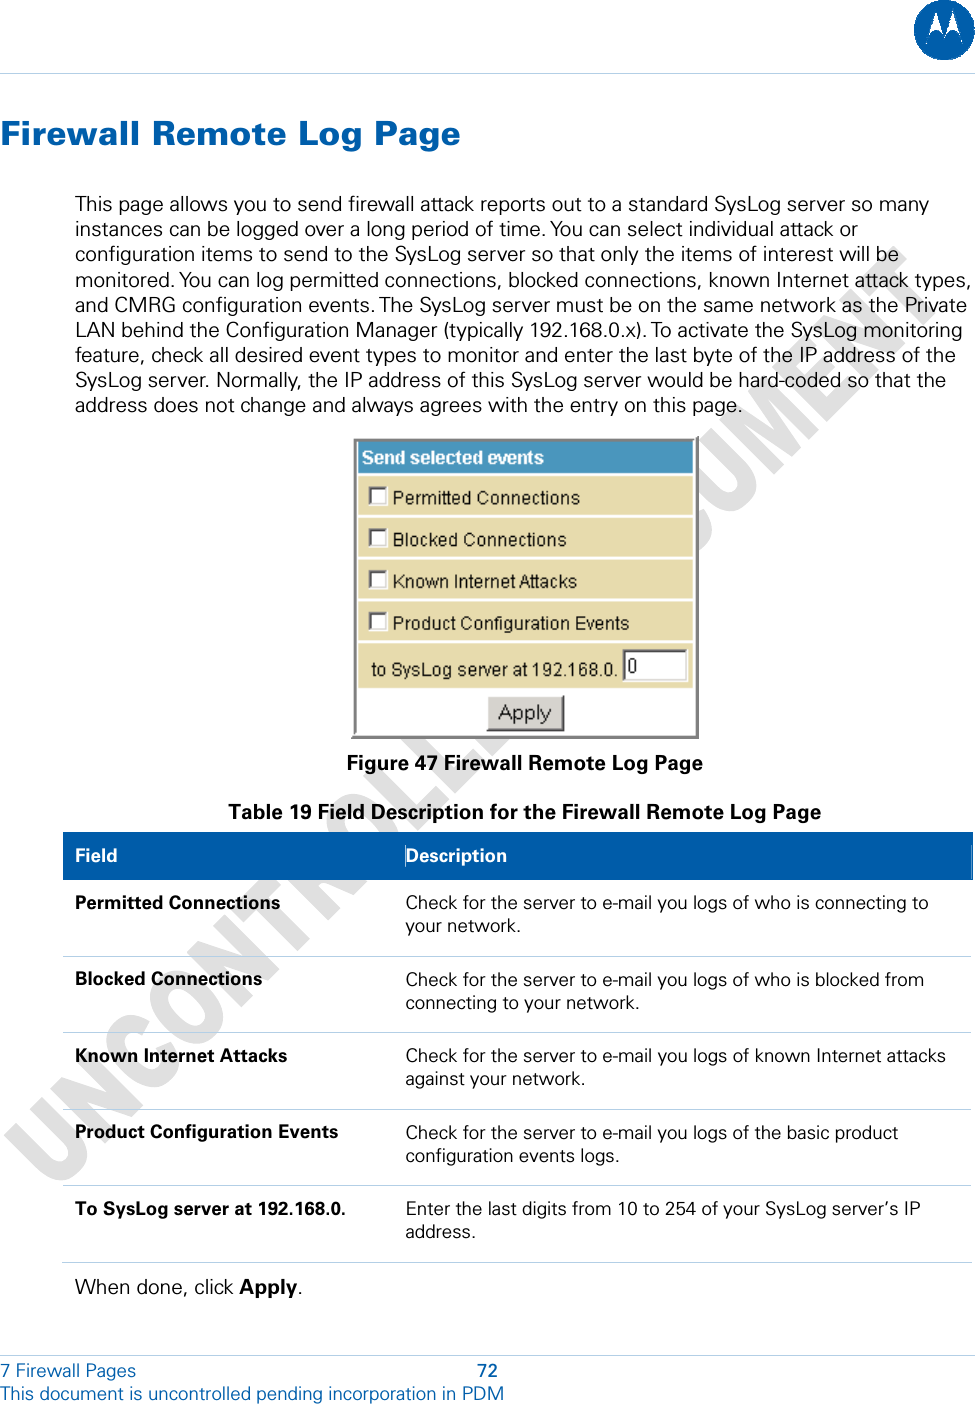  Firewall Remote Log Page This page allows you to send firewall attack reports out to a standard SysLog server so many instances can be logged over a long period of time. You can select individual attack or configuration items to send to the SysLog server so that only the items of interest will be monitored. You can log permitted connections, blocked connections, known Internet attack types, and CMRG configuration events. The SysLog server must be on the same network as the Private LAN behind the Configuration Manager (typically 192.168.0.x). To activate the SysLog monitoring feature, check all desired event types to monitor and enter the last byte of the IP address of the SysLog server. Normally, the IP address of this SysLog server would be hard-coded so that the address does not change and always agrees with the entry on this page.  Figure 47 Firewall Remote Log Page Table 19 Field Description for the Firewall Remote Log Page Field   Description Permitted Connections  Check for the server to e-mail you logs of who is connecting to your network. Blocked Connections  Check for the server to e-mail you logs of who is blocked from connecting to your network. Known Internet Attacks  Check for the server to e-mail you logs of known Internet attacks against your network. Product Configuration Events  Check for the server to e-mail you logs of the basic product configuration events logs. To SysLog server at 192.168.0.  Enter the last digits from 10 to 254 of your SysLog server’s IP address.  When done, click Apply.7 Firewall Pages  72 This document is uncontrolled pending incorporation in PDM  